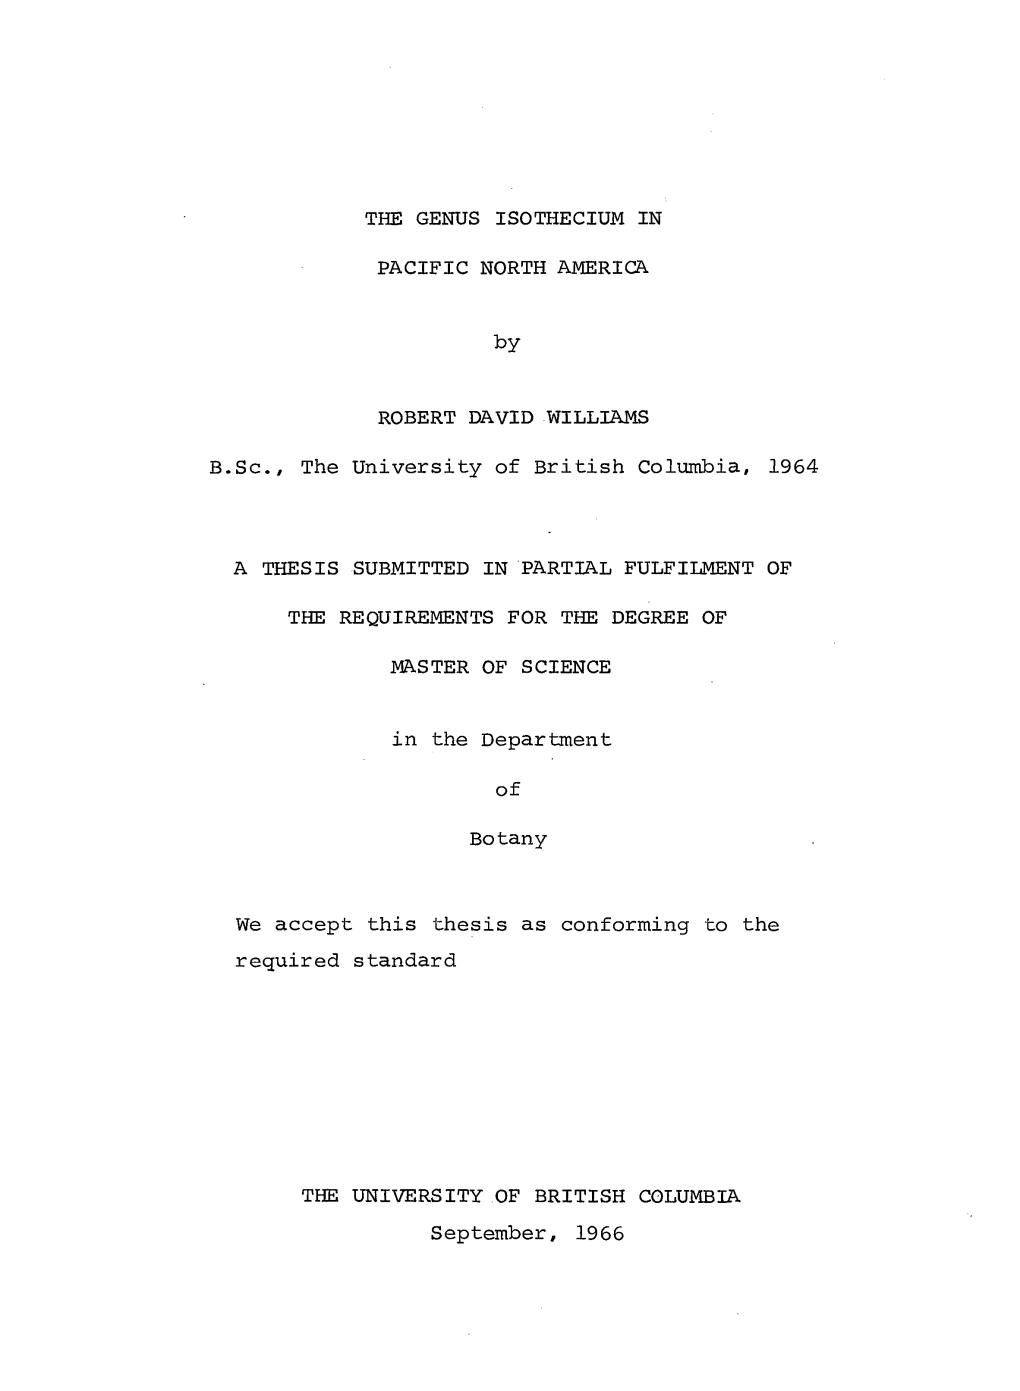 THE GENUS ISOTHECIUM in PACIFIC NORTH AMERICA by ROBERT DAVID WILLIAMS B.Sc, the University of British Columbia, 1964 a THESIS S